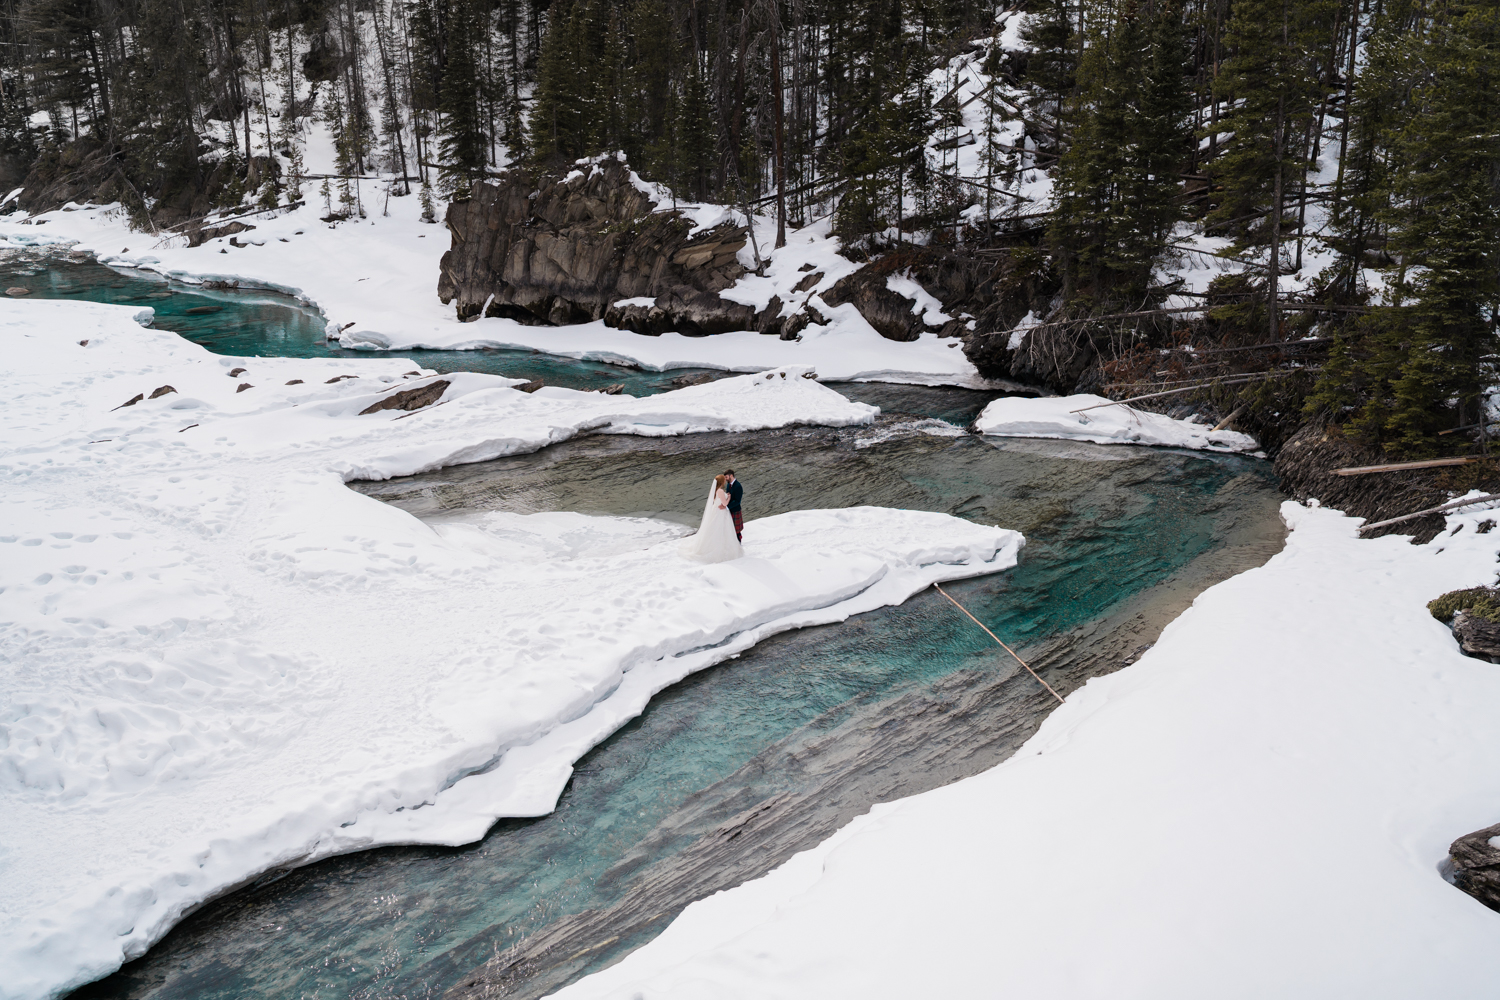 Bride and groom snuggle on a snowy outcrop in the Kicking Horse River at the natural bridge